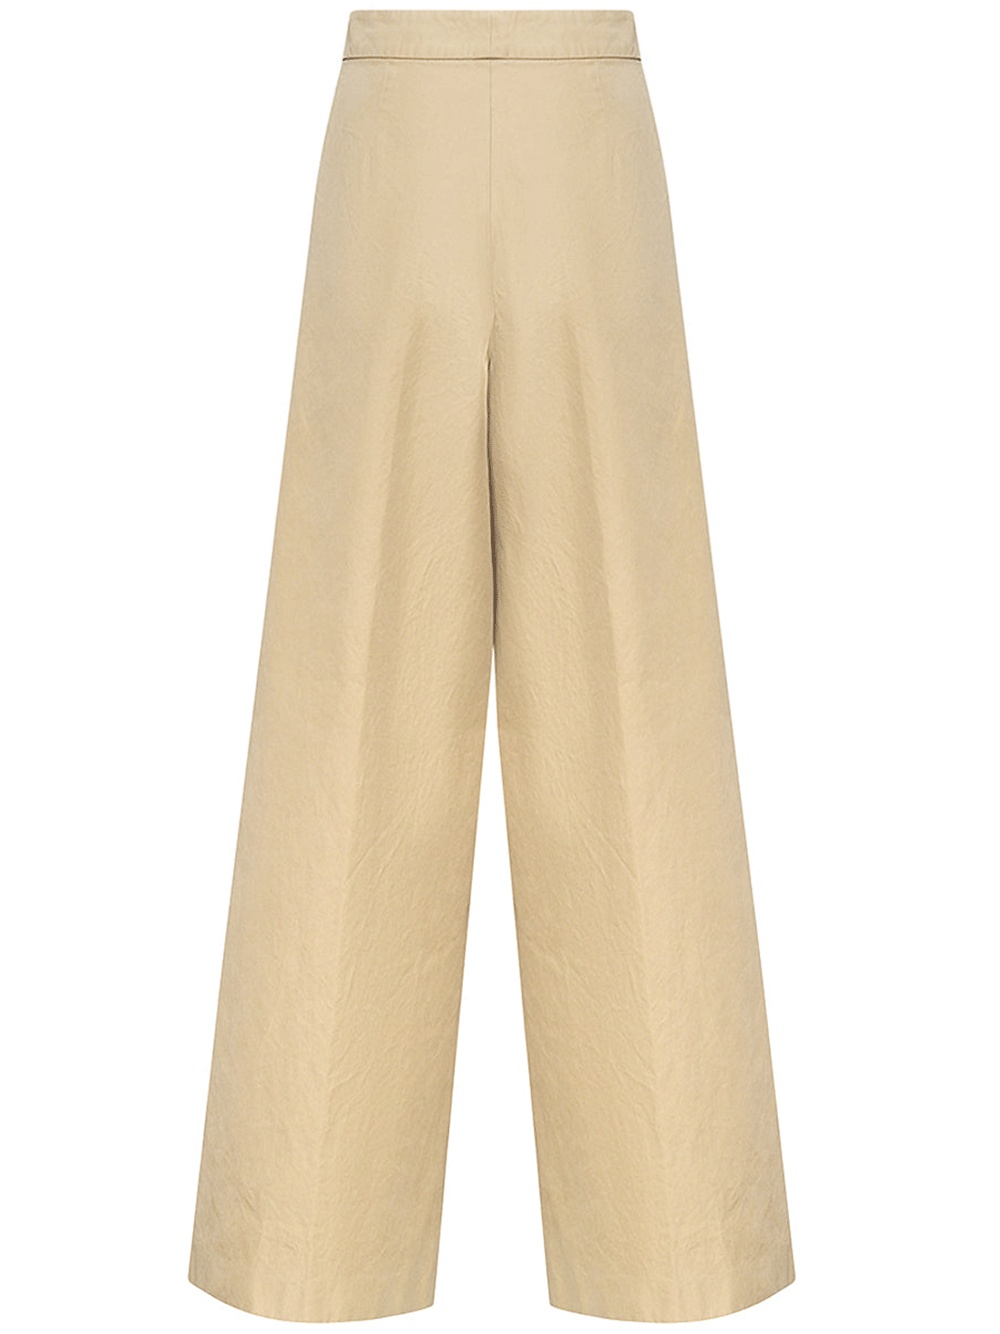 Stone Washed Cotton Trousers - 2